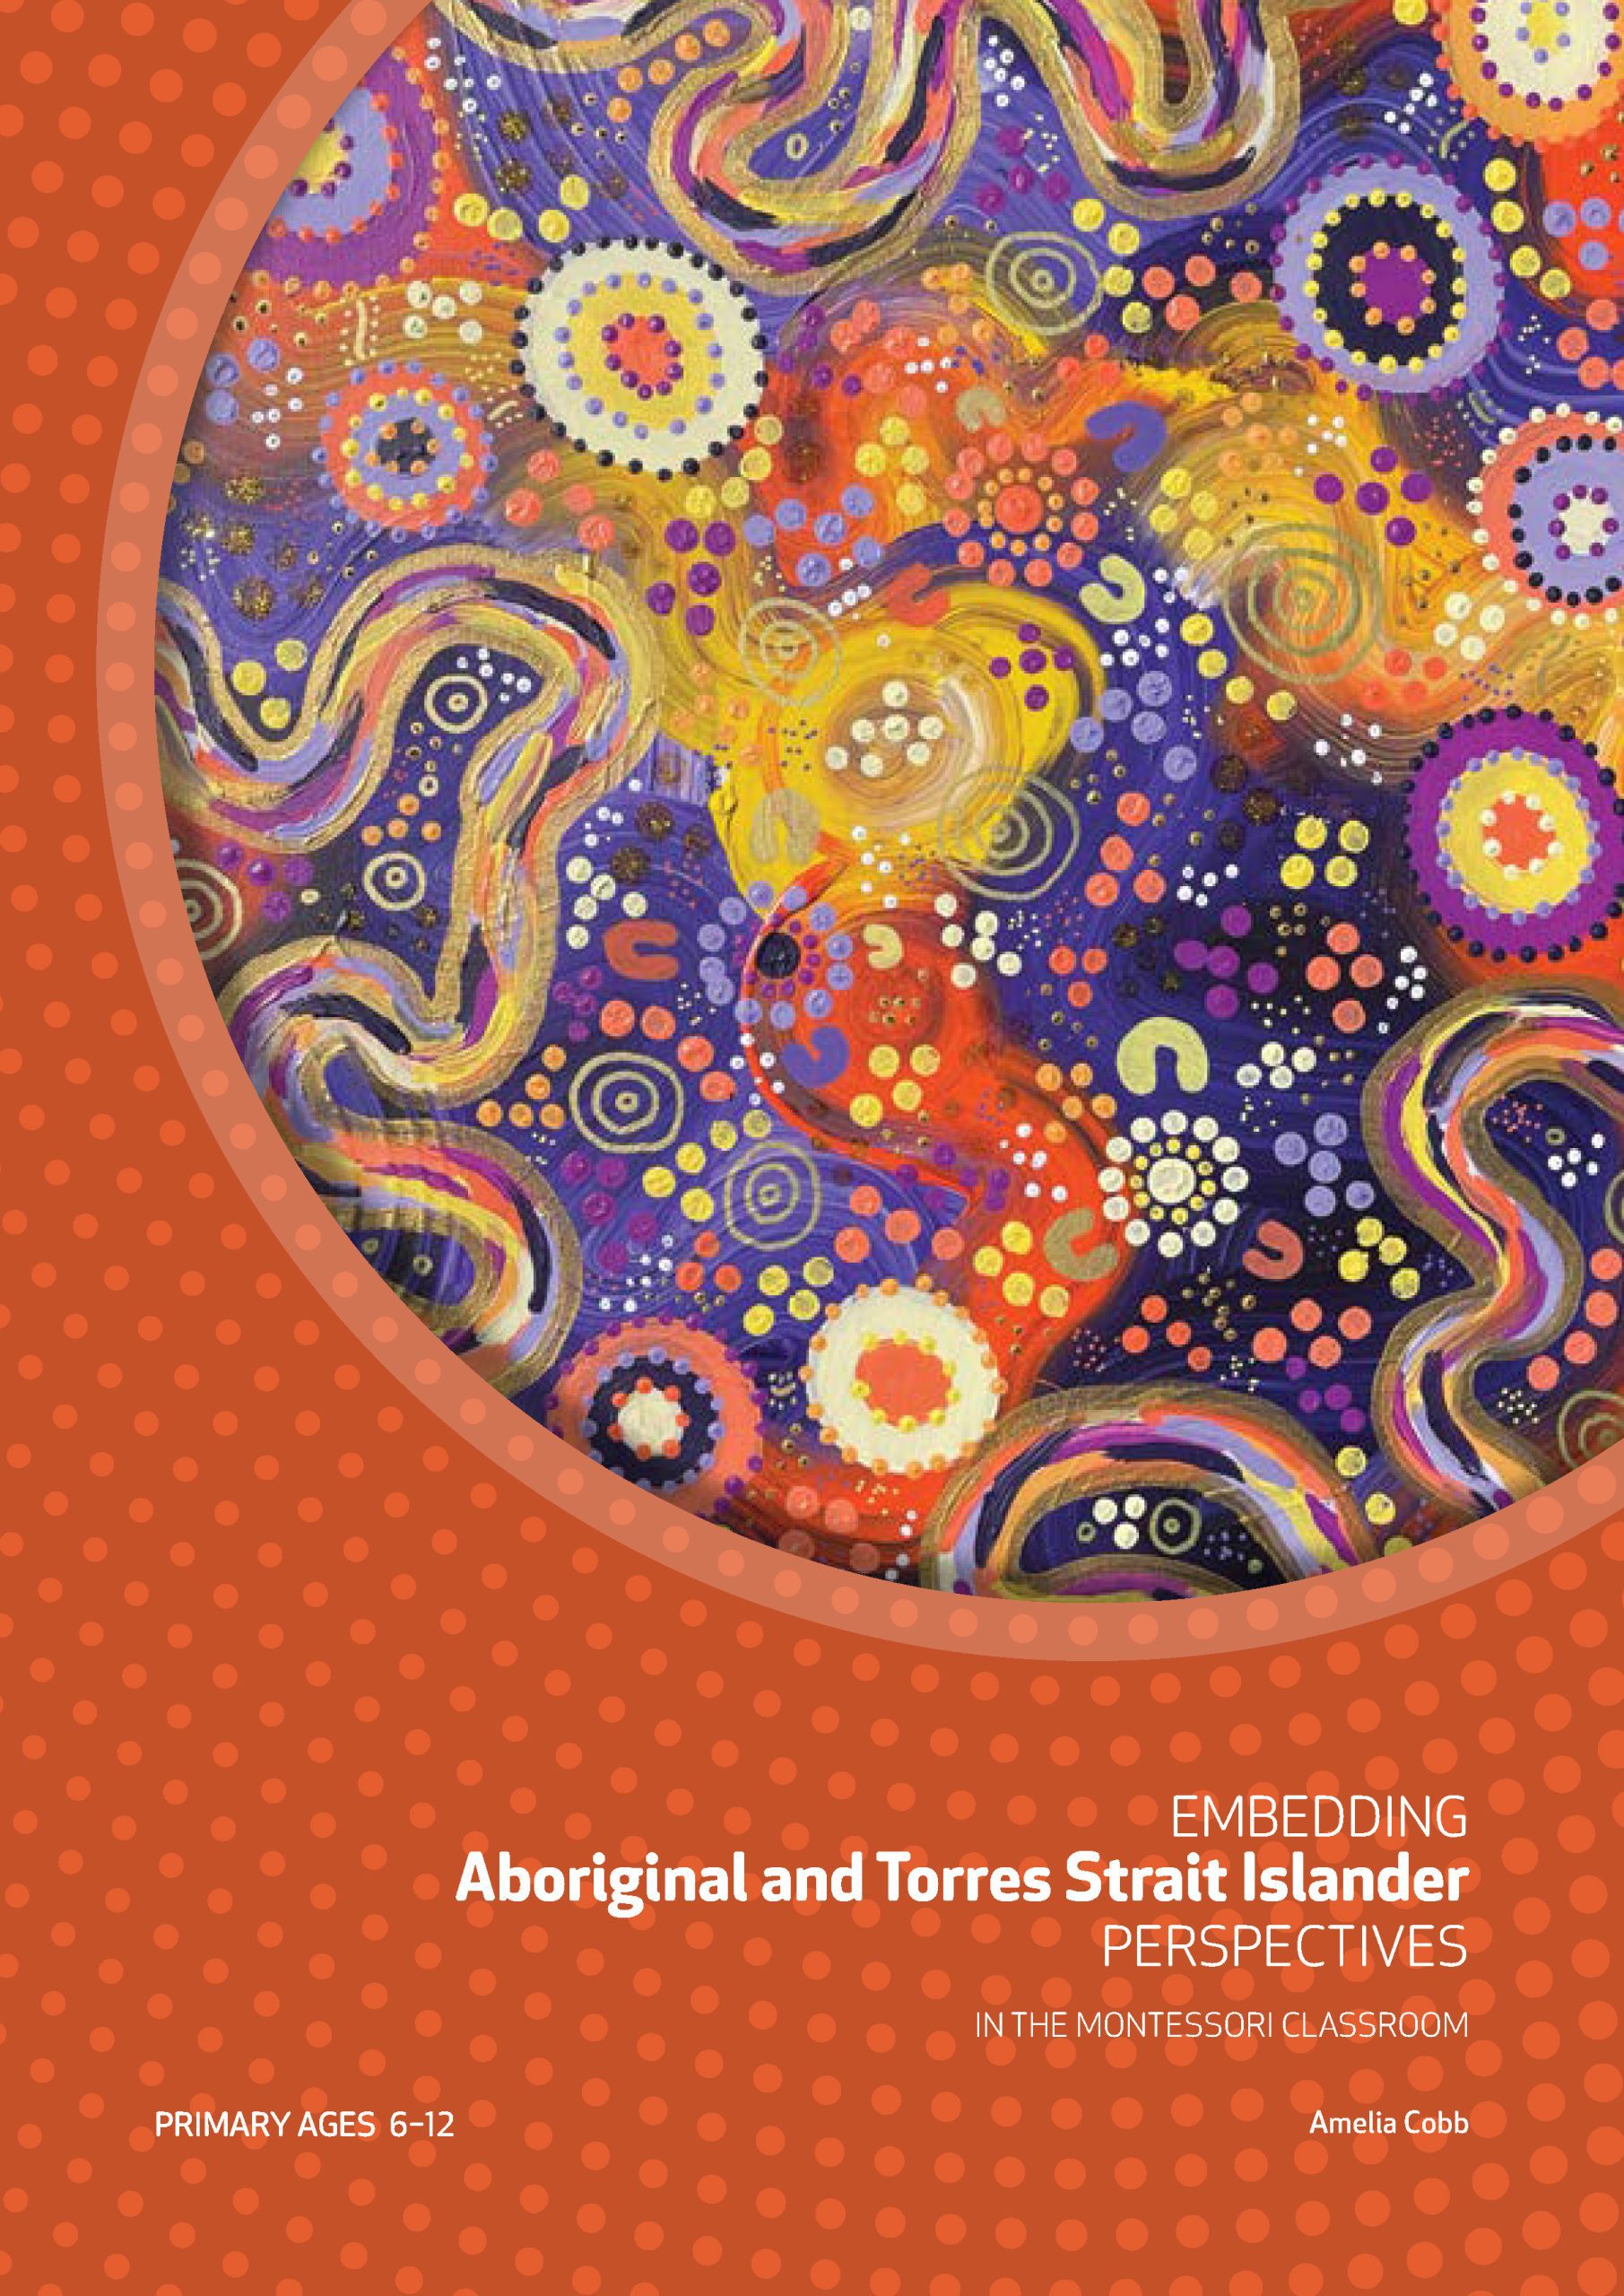 Embedding. Aboriginal and torres strait islander perspectives in the montessori classroom by Amelia Cobb book cover